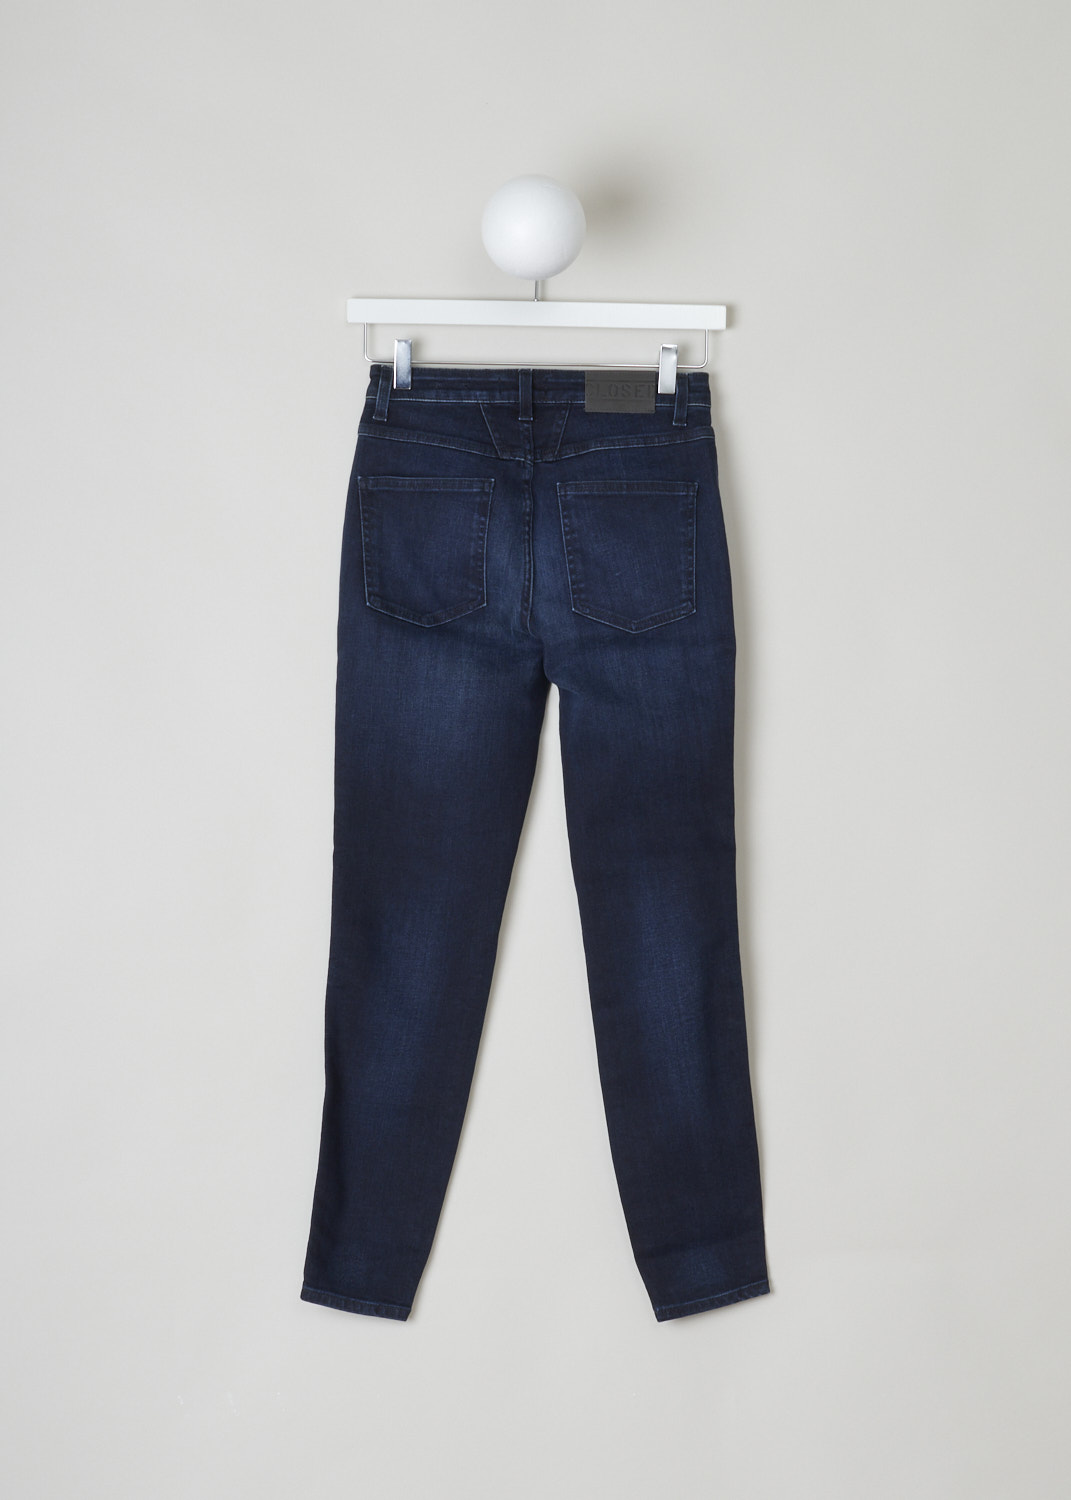 Closed, Dark blue skinny pusher jeans, skinny_pusher_C91231_04B_2C_DBL, blue, back, This skinny pusher model comes with a high-waist and skinny fit. Featuring the signature x-shaped pockets on the front and two regular patch pockets on the back. The cotton blend has high elasticity and is known for its softness and comfort.